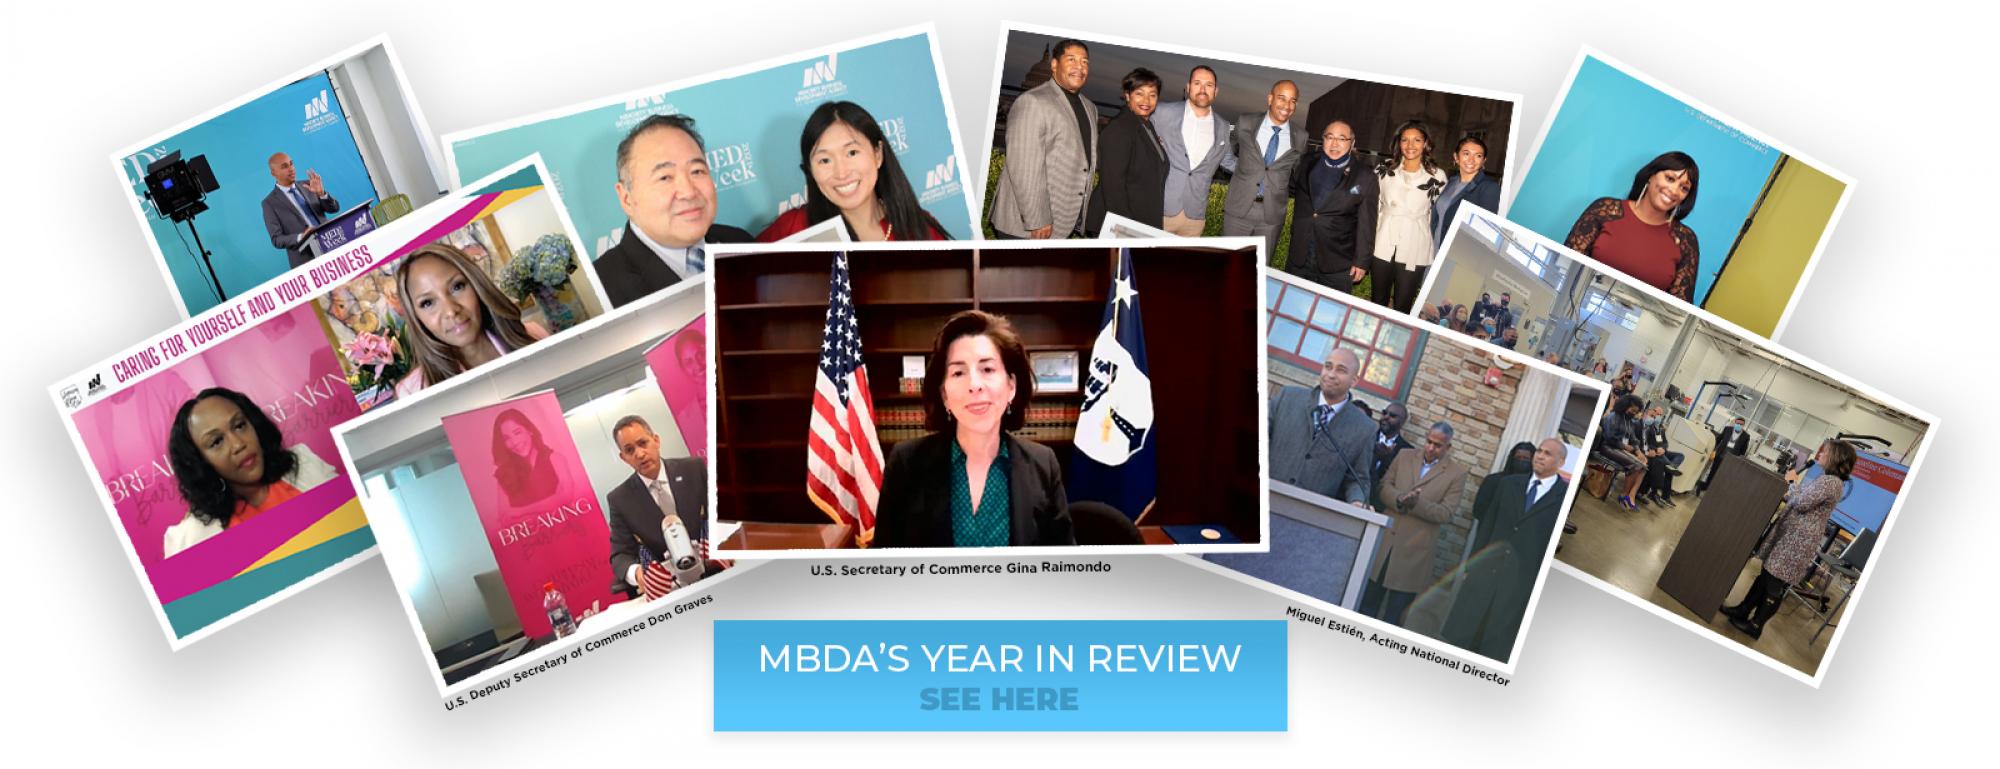 MBDA's Year In Review | See Here